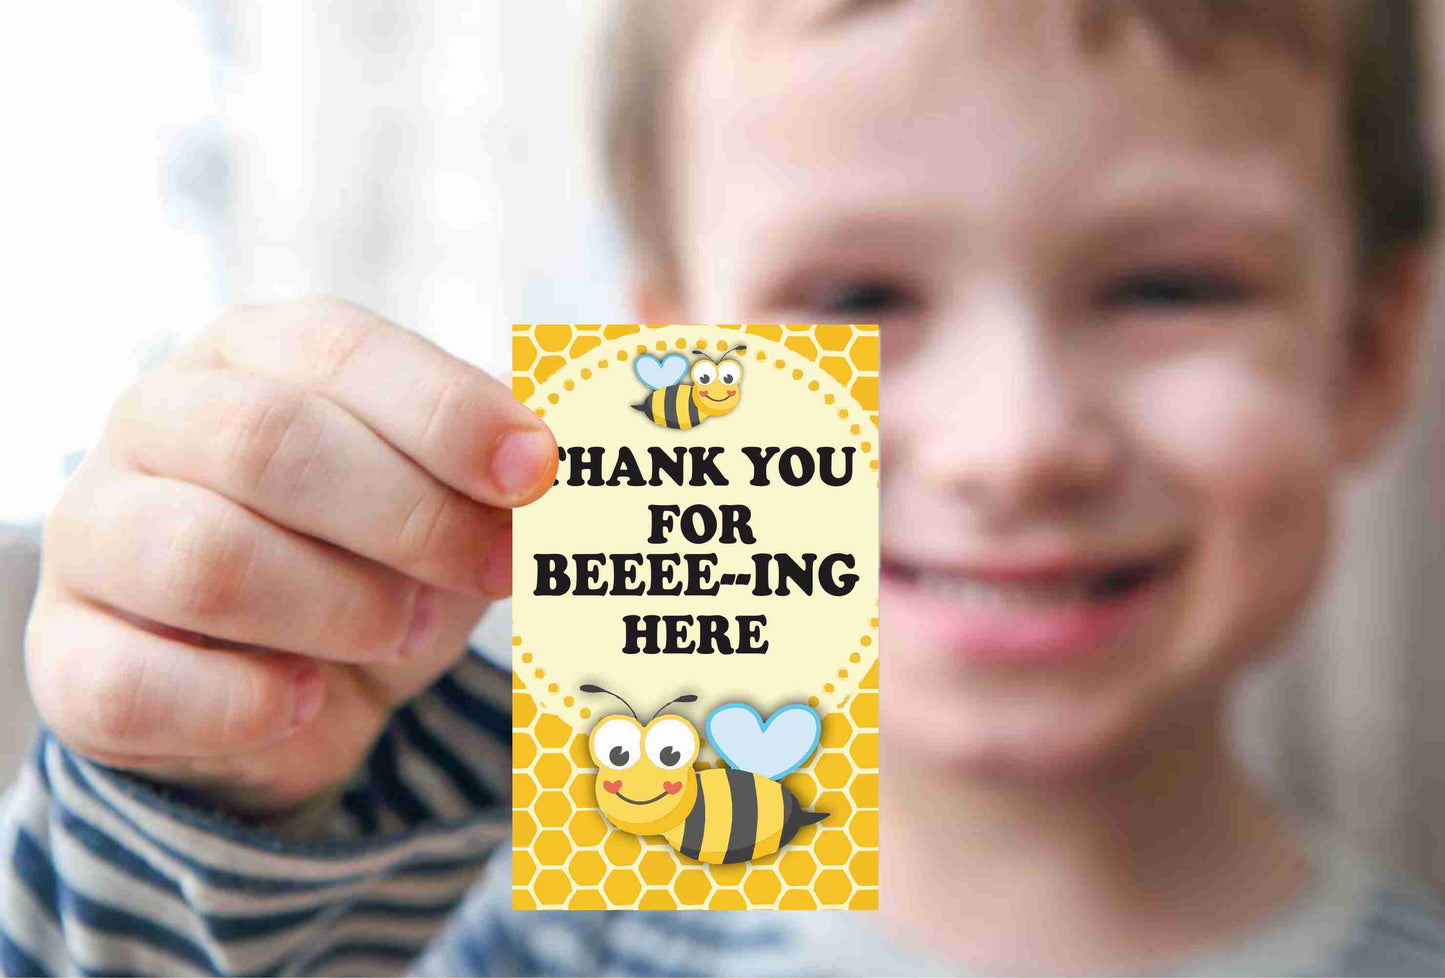 Honey Bee theme Return Gifts Thank You Tags Thank u Cards for Gifts 20 Nos Cards and Glue Dots